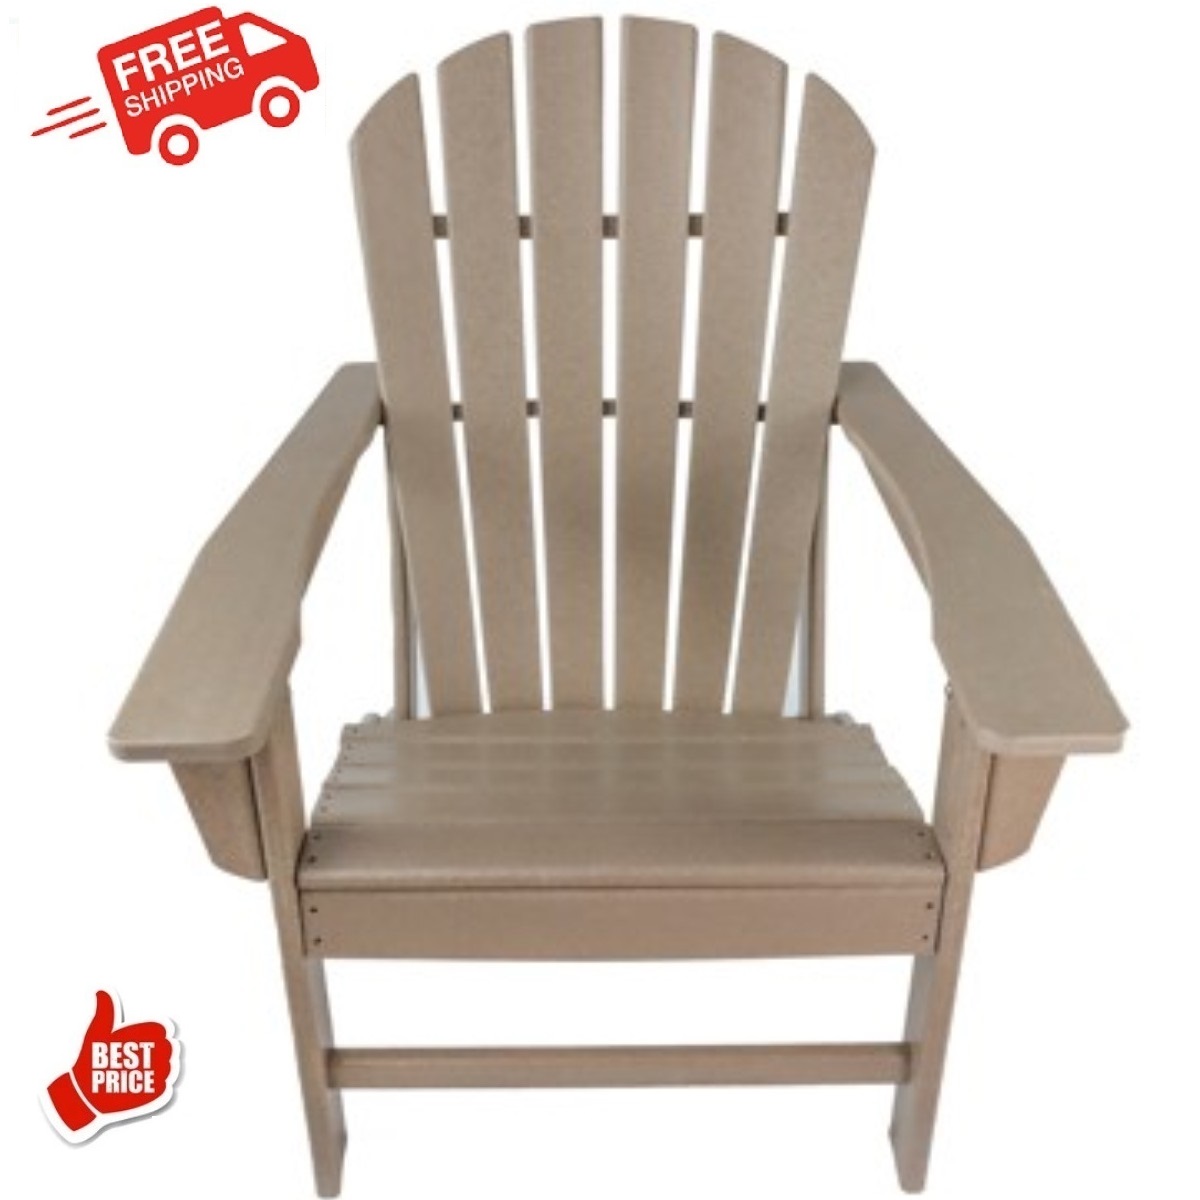 Adirondack Chair Resin, 350 lbs Capacity Load,Patio Chair Lawn Chair Outdoor Adirondack Chairs Weather Resistant for Patio Deck Garden 33.07*31.1*36.4" HDPE Resin Wood,Brown - image 3 of 8